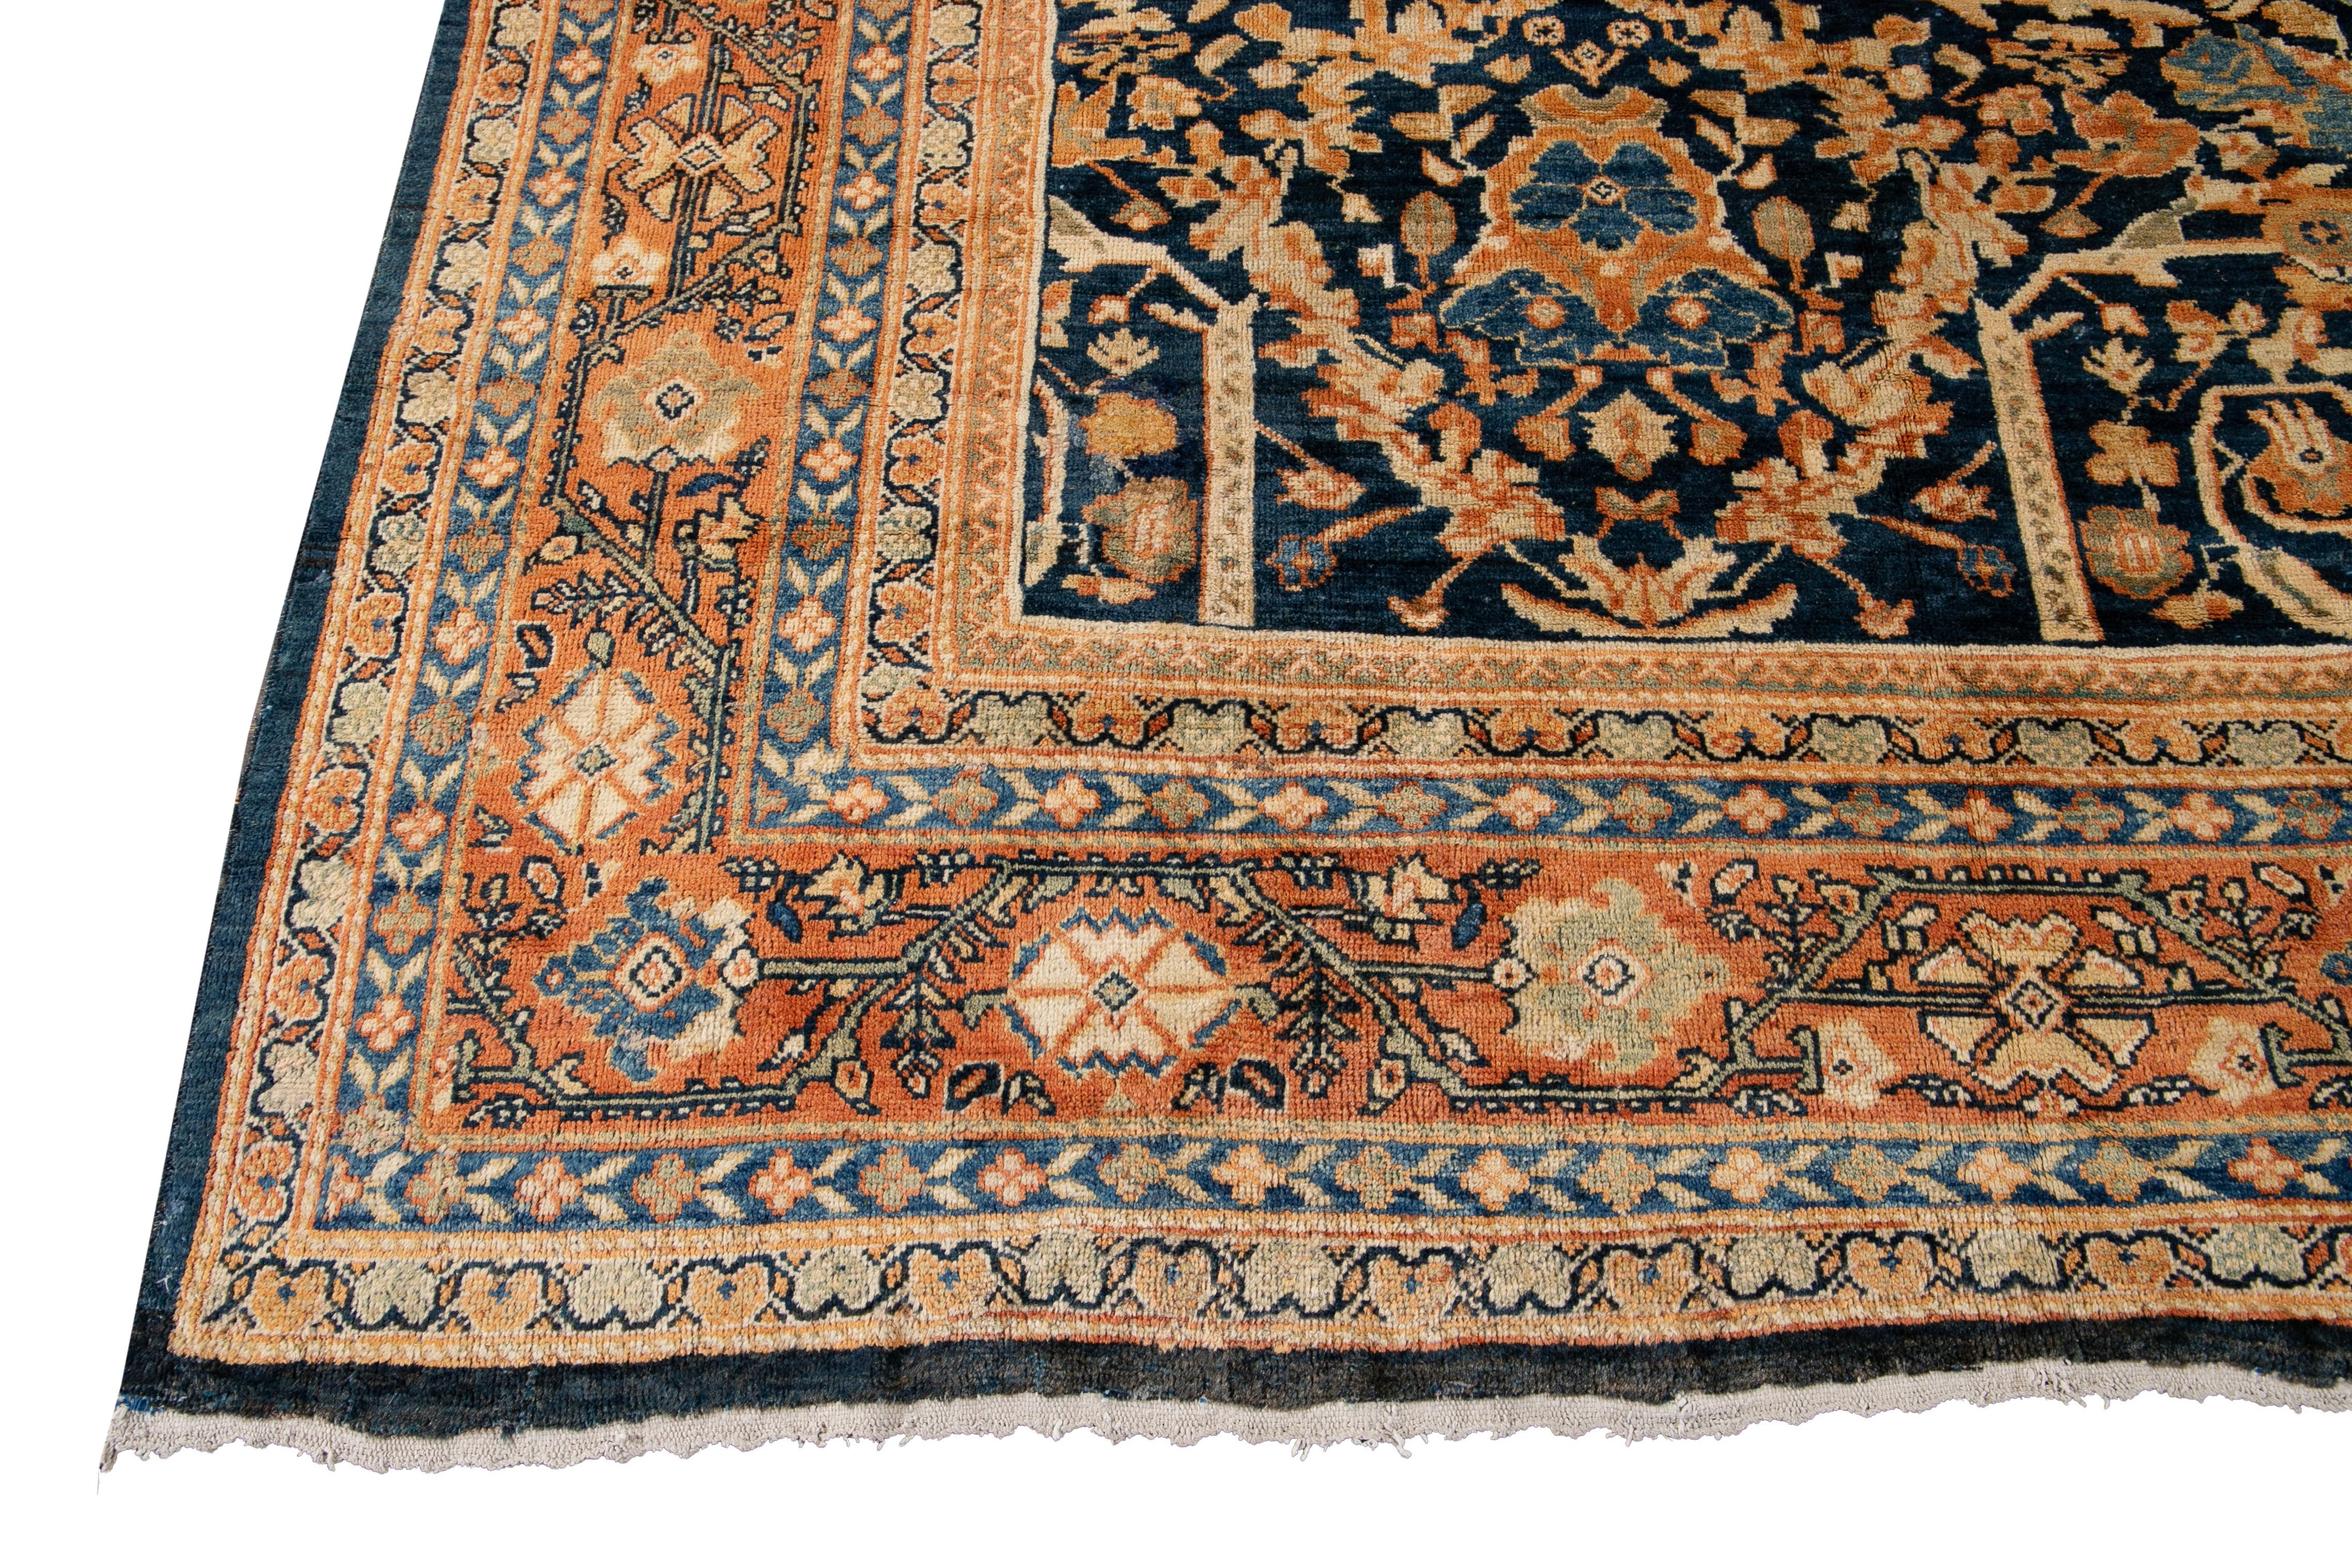 Oversize Antique Persian Mahal Blue Handmade Allover Floral Wool Rug In Excellent Condition For Sale In Norwalk, CT